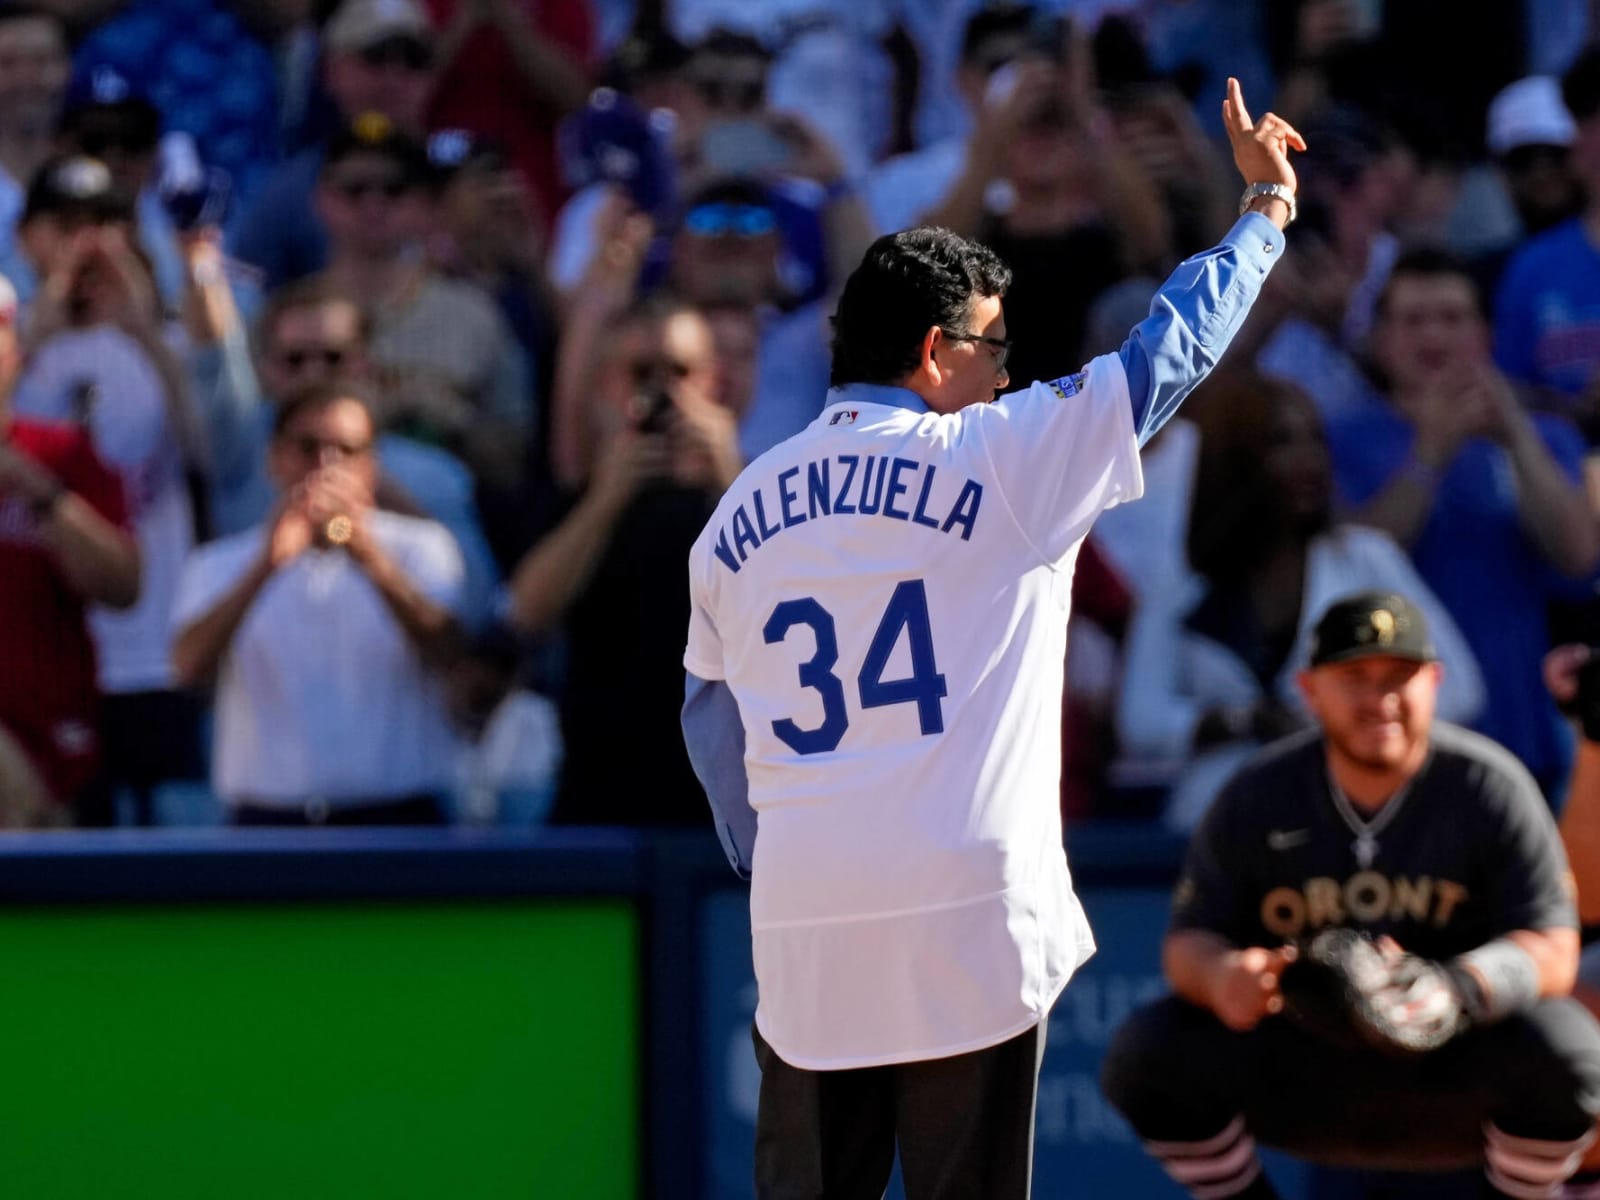 Fernandomania' lives again at Dodger Stadium with retirement of